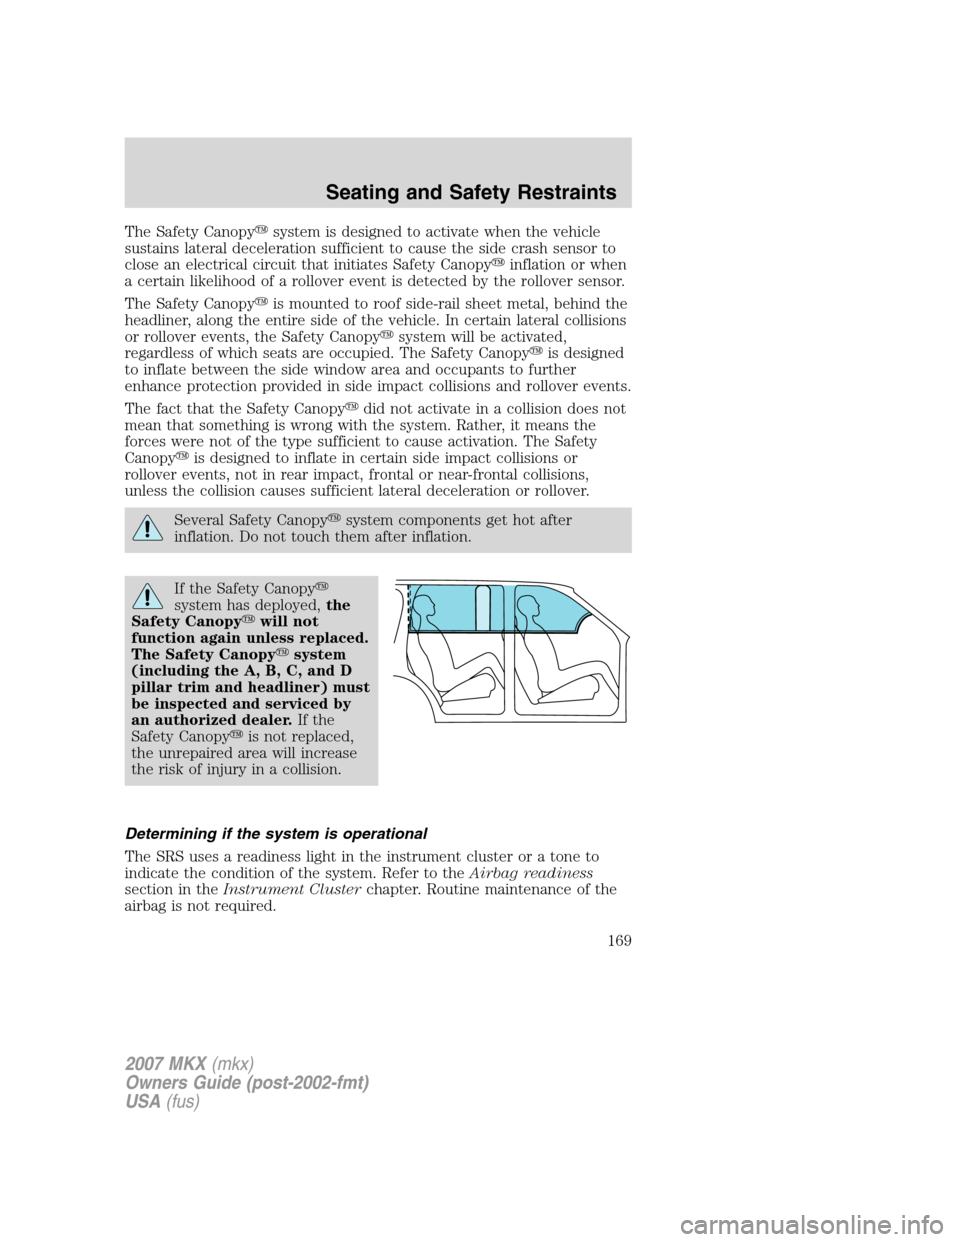 LINCOLN MKX 2007  Owners Manual The Safety Canopysystem is designed to activate when the vehicle
sustains lateral deceleration sufficient to cause the side crash sensor to
close an electrical circuit that initiates Safety Canopyin